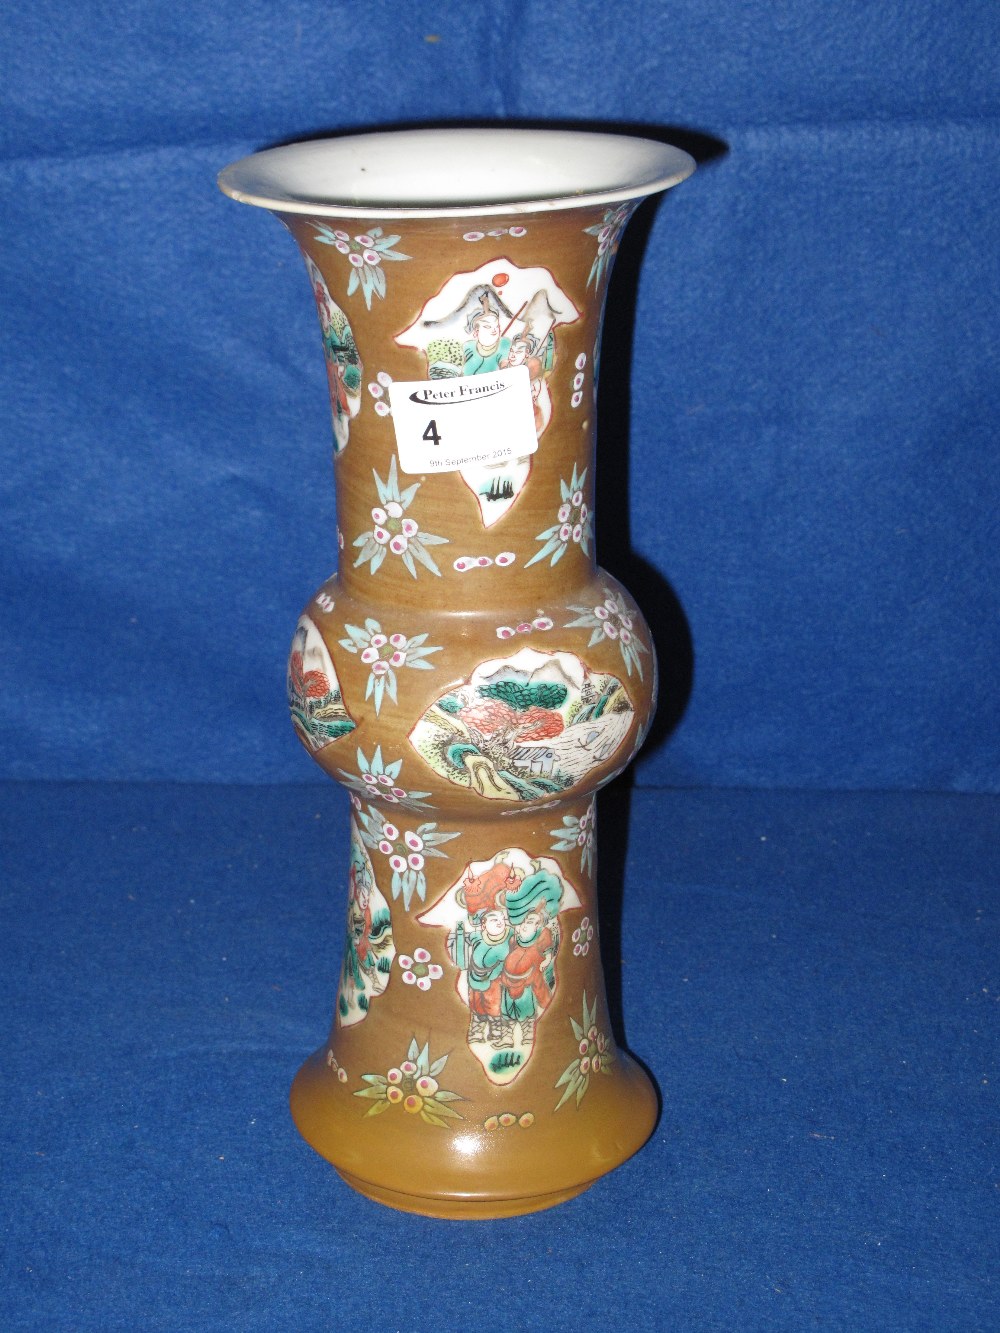 Chinese porcelain cylindrical vase with flared neck and baluster to the body, overall decorated with